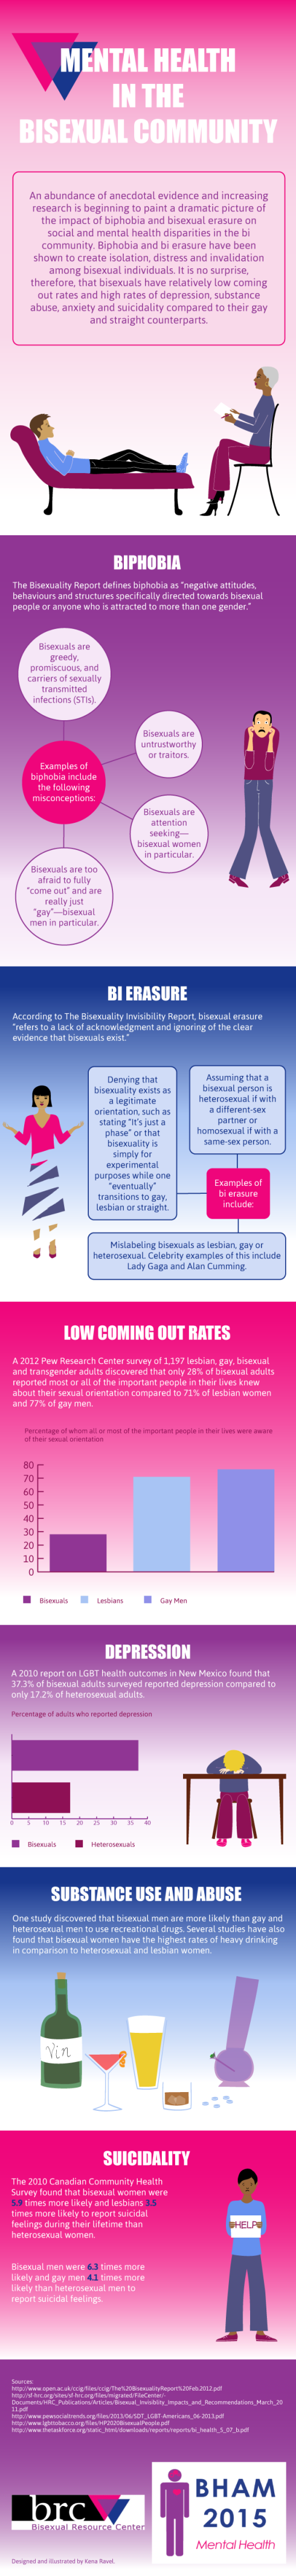 mental-health-in-the-bisexual-community_infographic